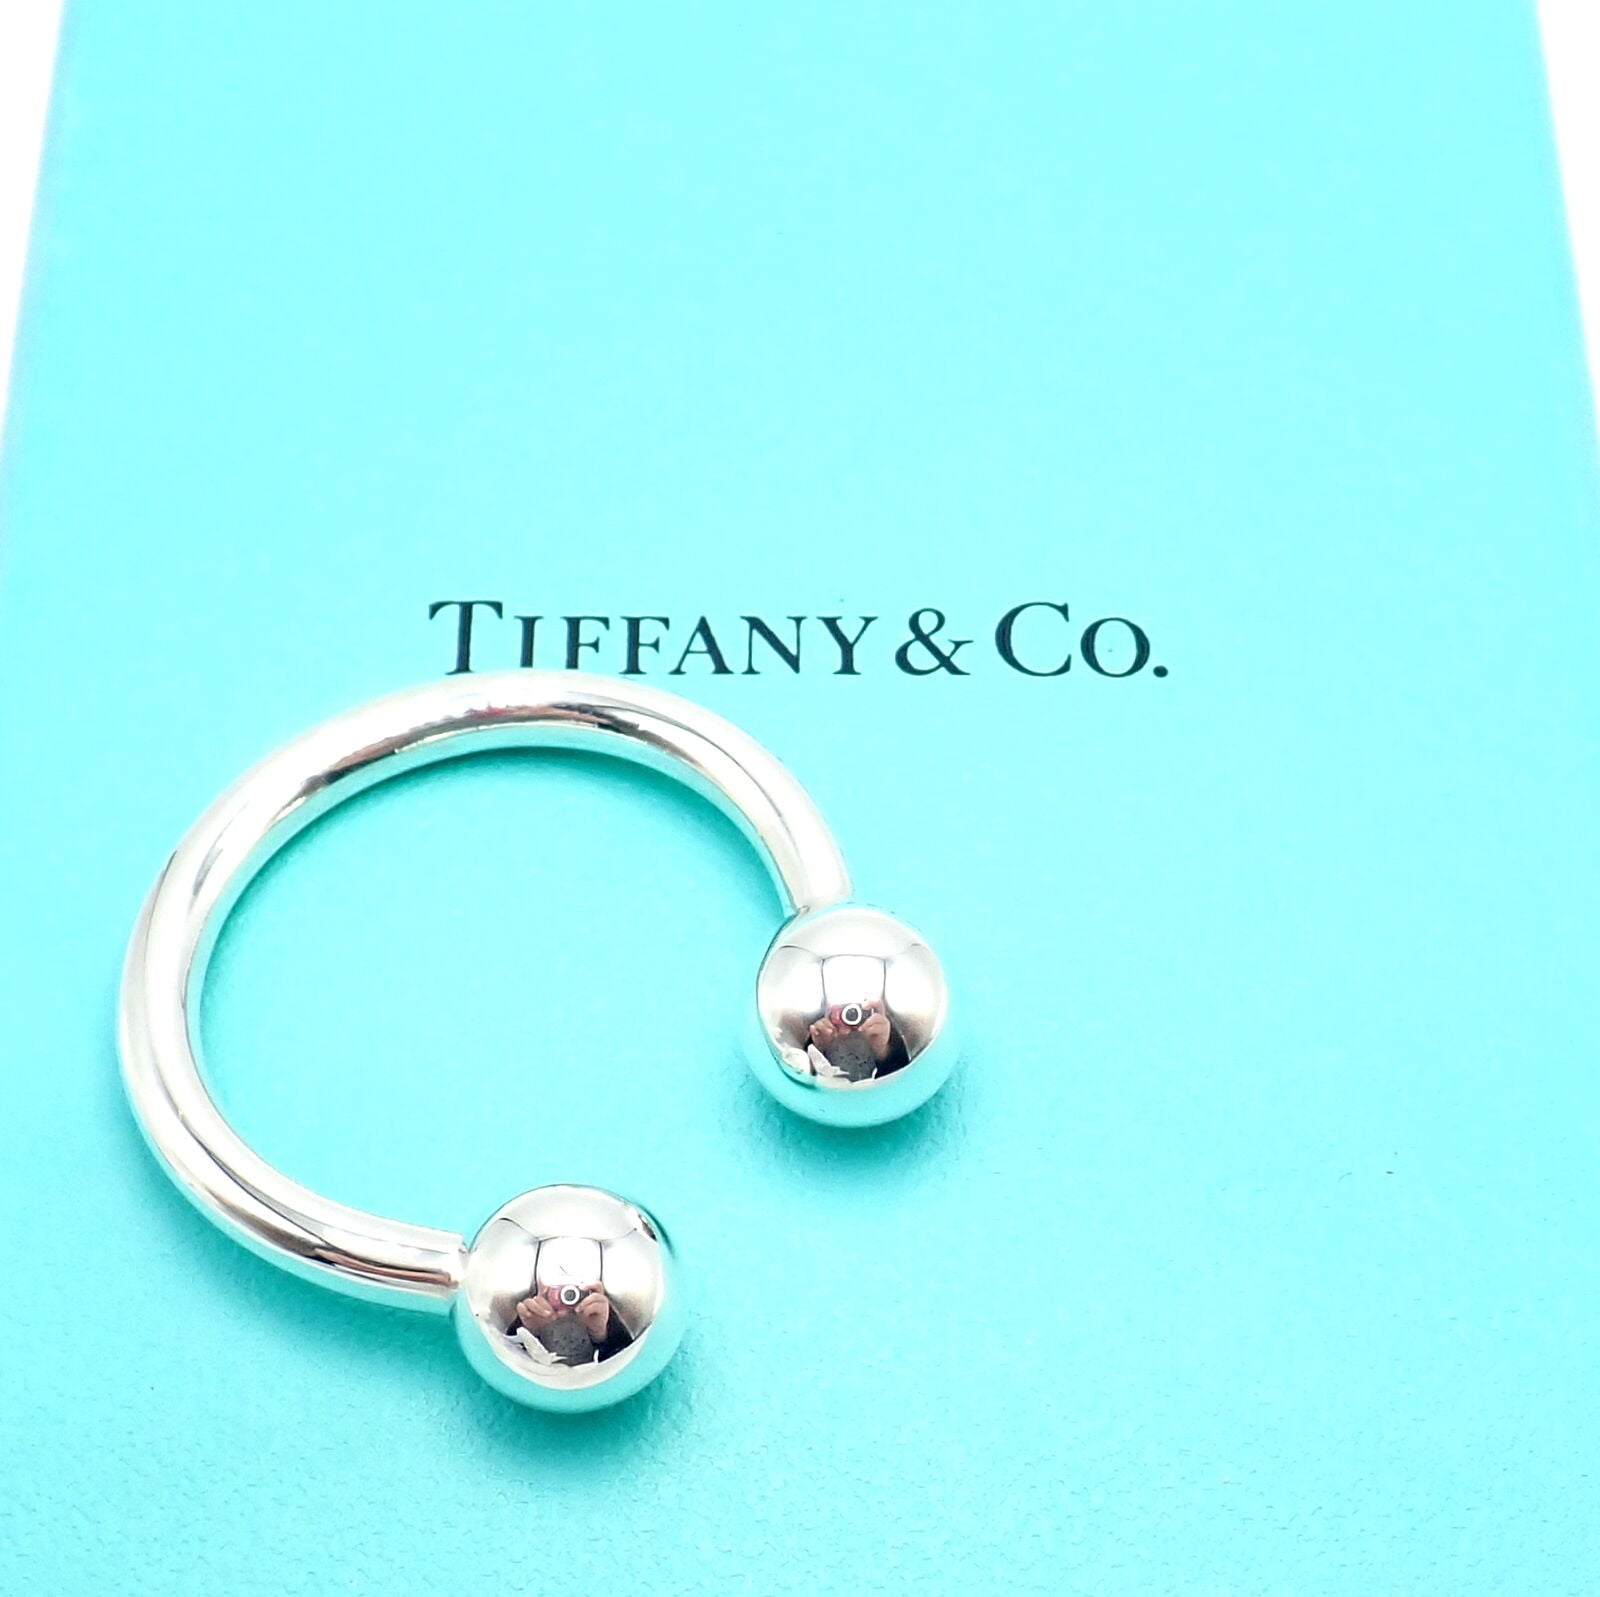 Tiffany & Co. Jewelry & Watches:Other Jewelry Authentic! Vintage Tiffany & Co. Silver Classic Ball Keychain Keyring